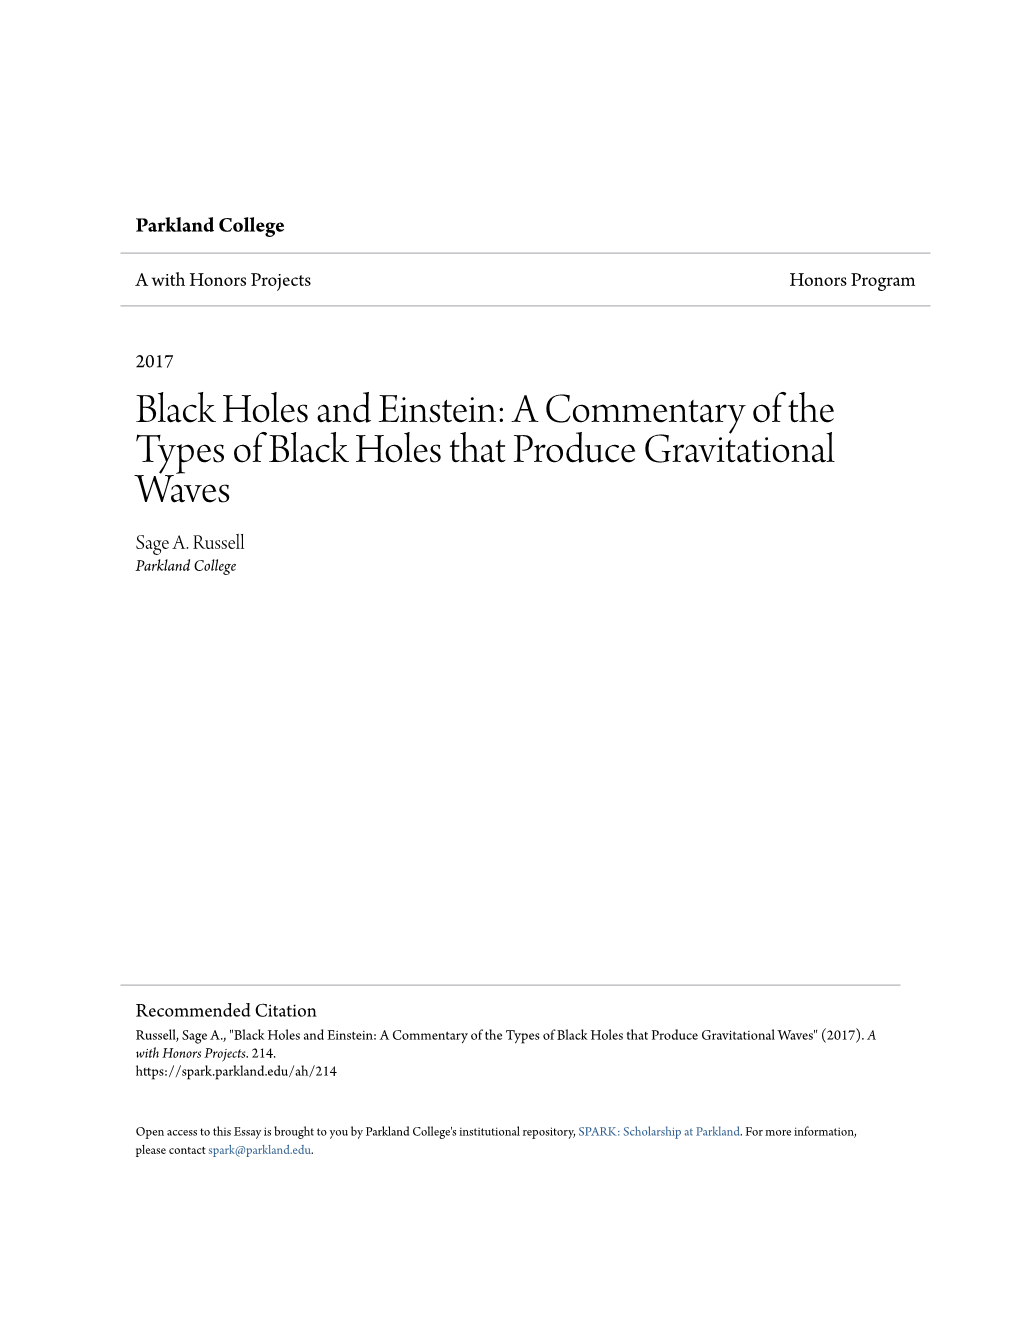 A Commentary of the Types of Black Holes That Produce Gravitational Waves Sage A